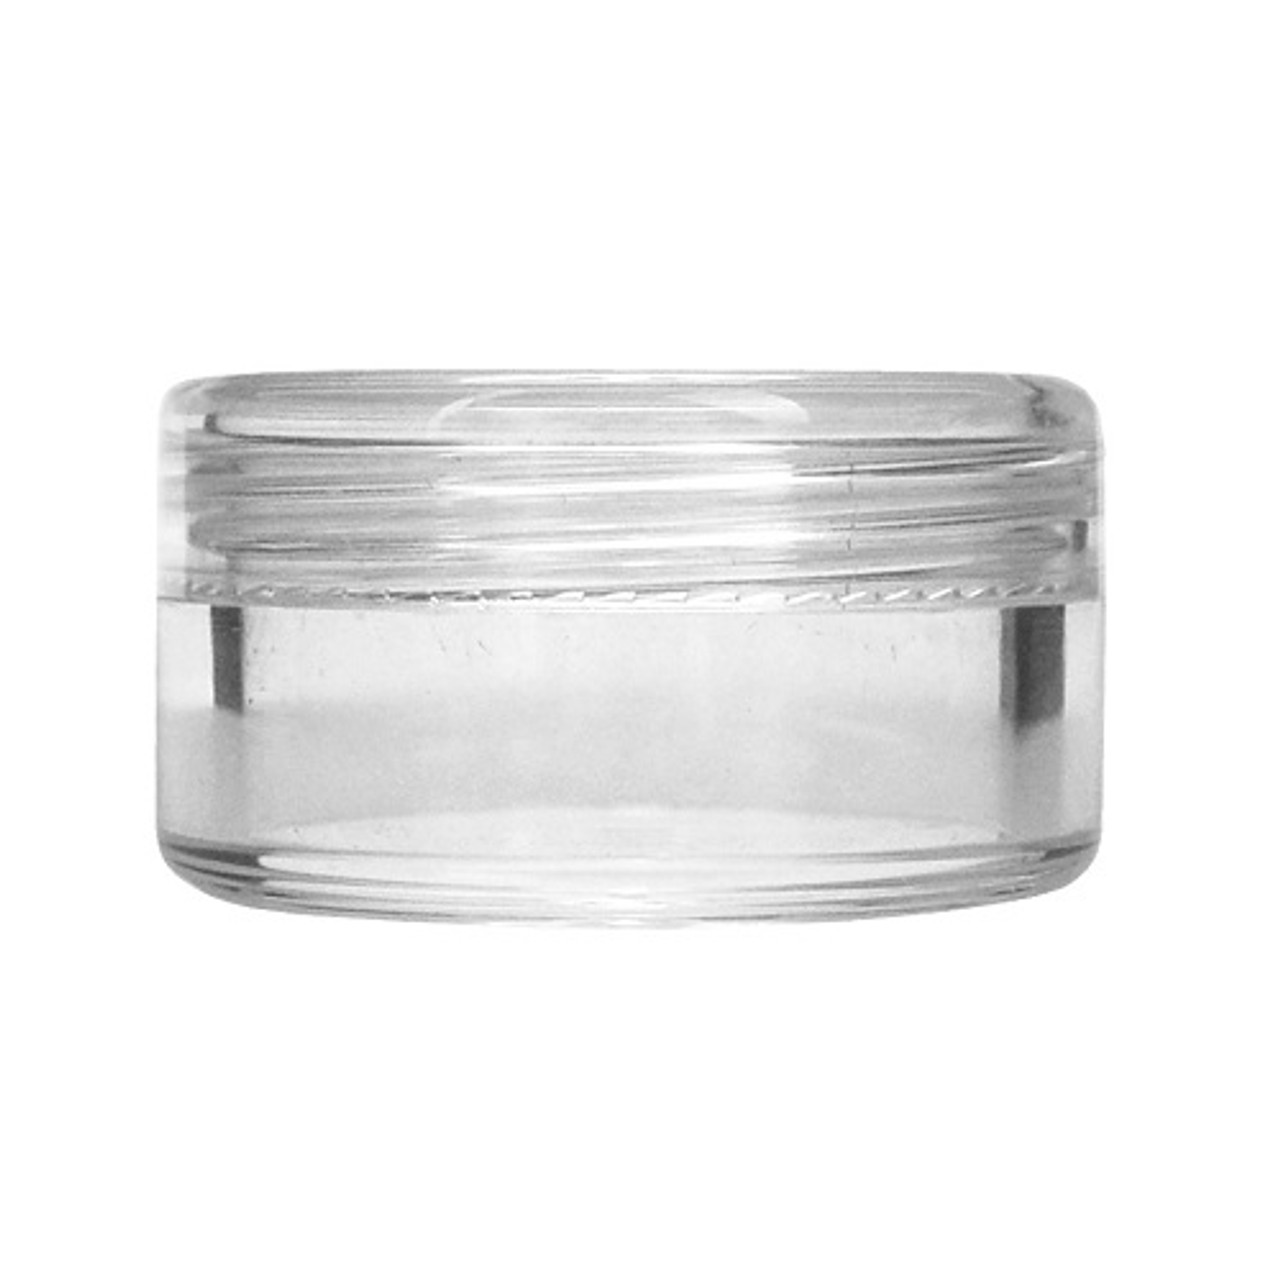 2oz 4oz Clear Plastic Containers Tubs with Separate Lids Food Safe